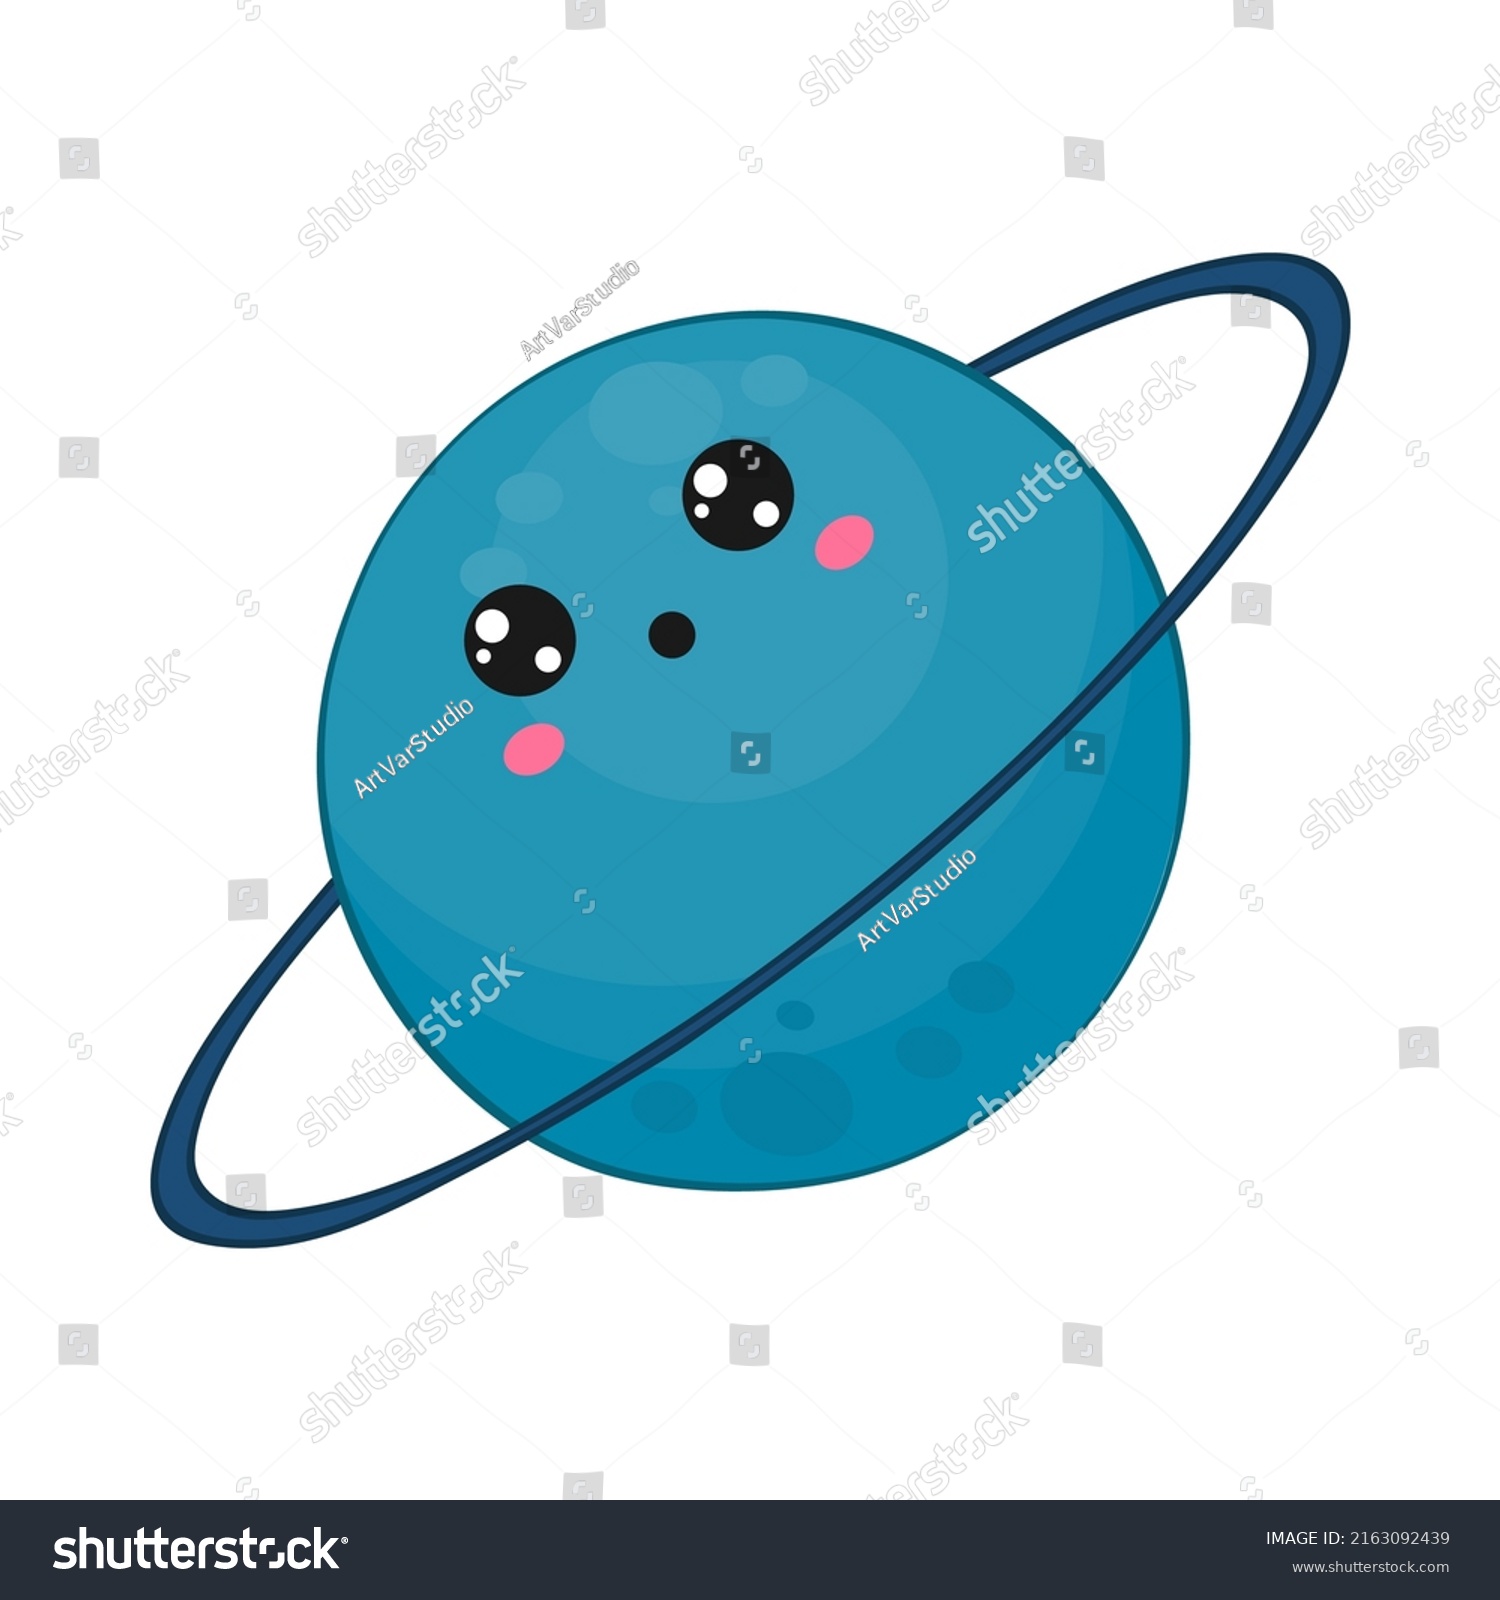 SVG of Cute kawaii planet Saturn Vector illustration of a planet. Picture of planet for kids, baby book, fairy tales, covers, baby shower invitation, textile t-shirt.
 svg